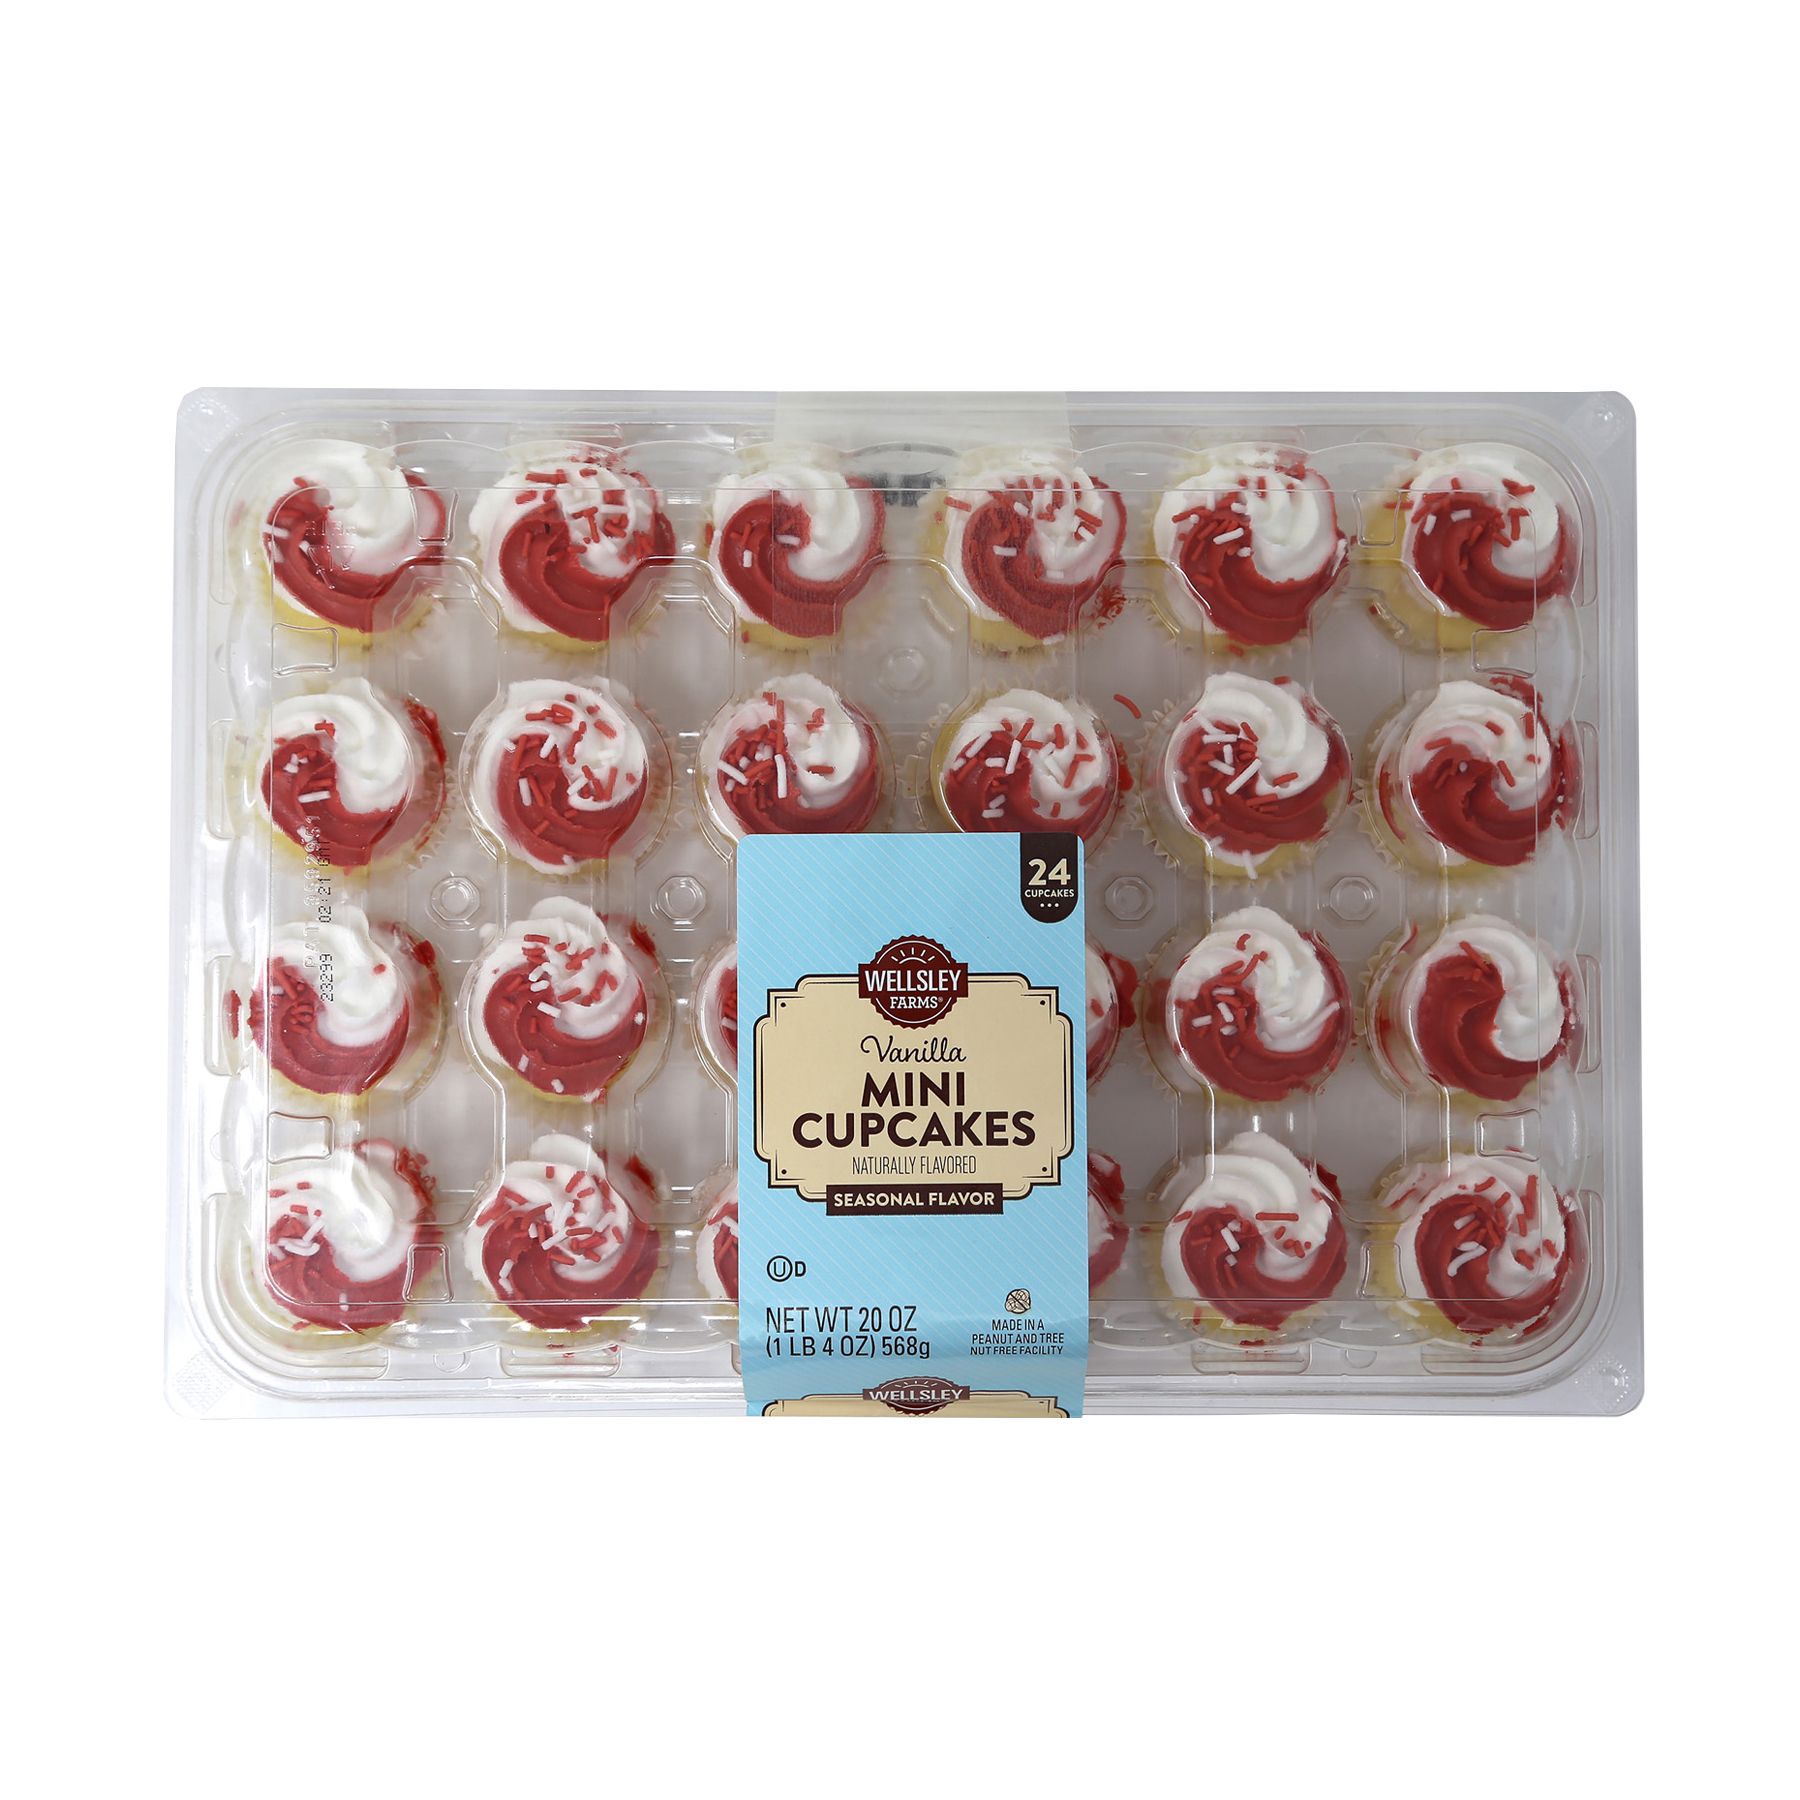 Wellsley Farms Holiday Vanilla Cupcakes With Red & White Swirl Frosting, 24 ct.